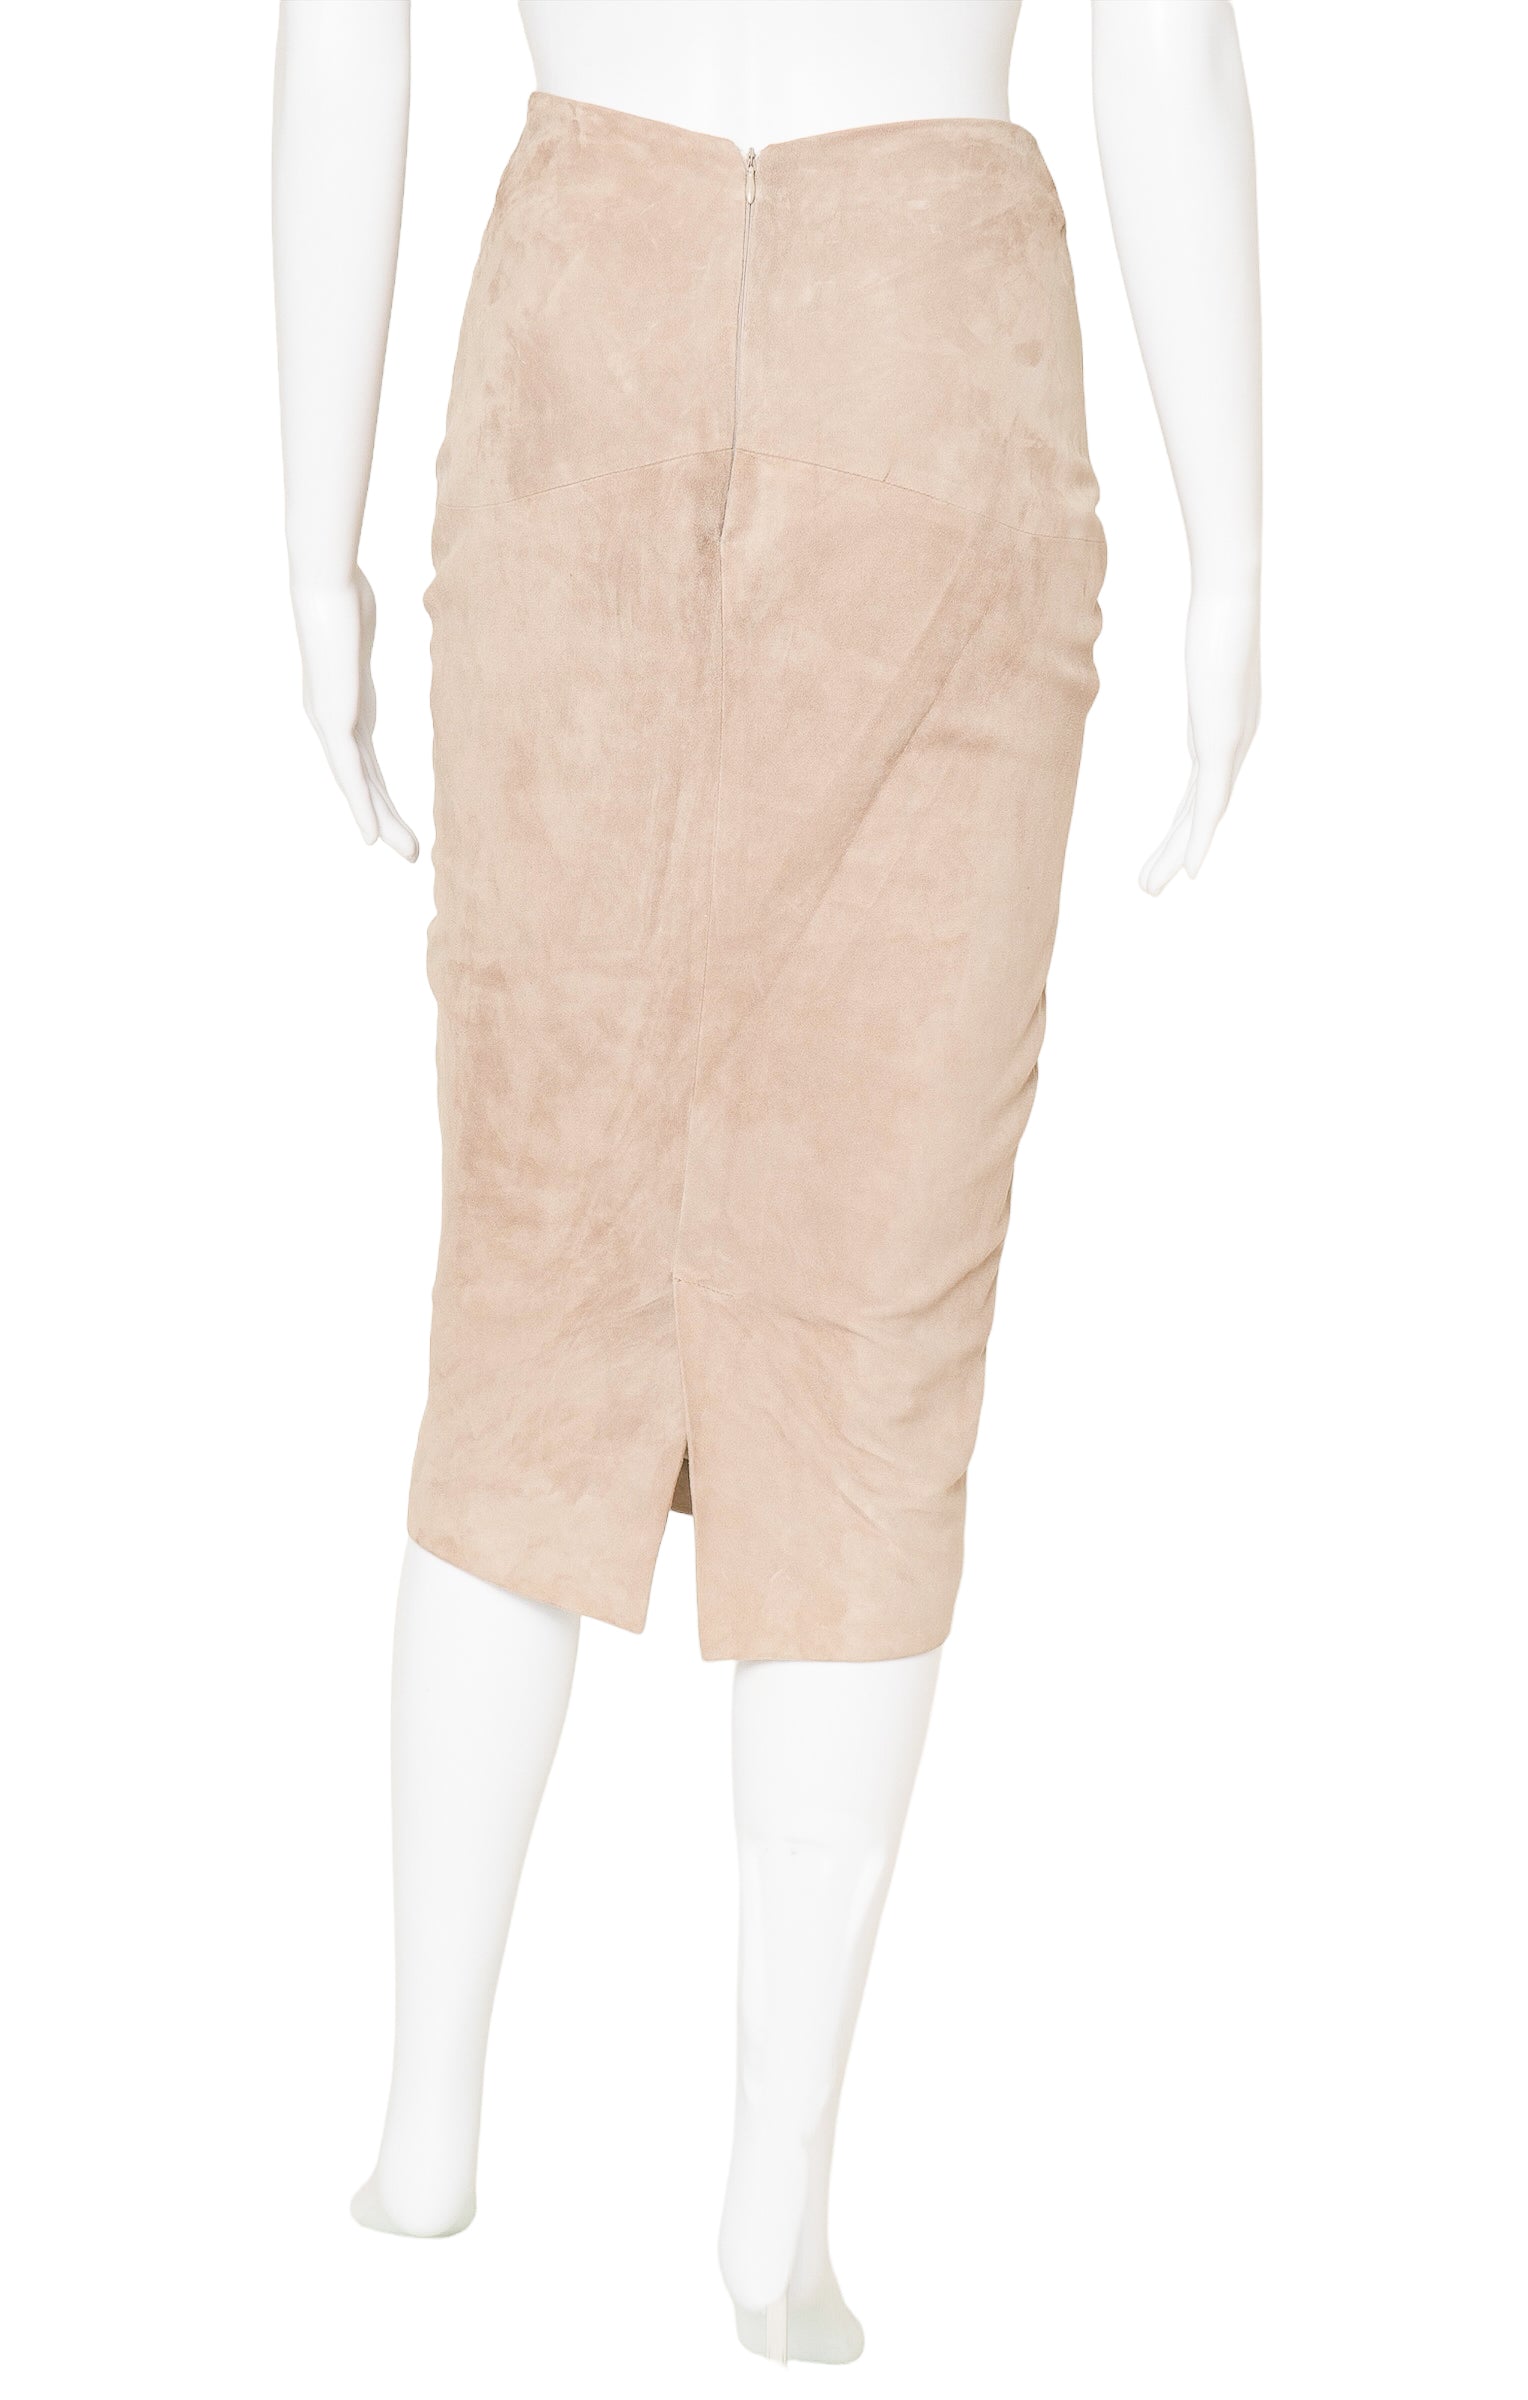 ERMANNO SCERVINO (RARE) Skirt Size: No size tags, fits like US 2-4